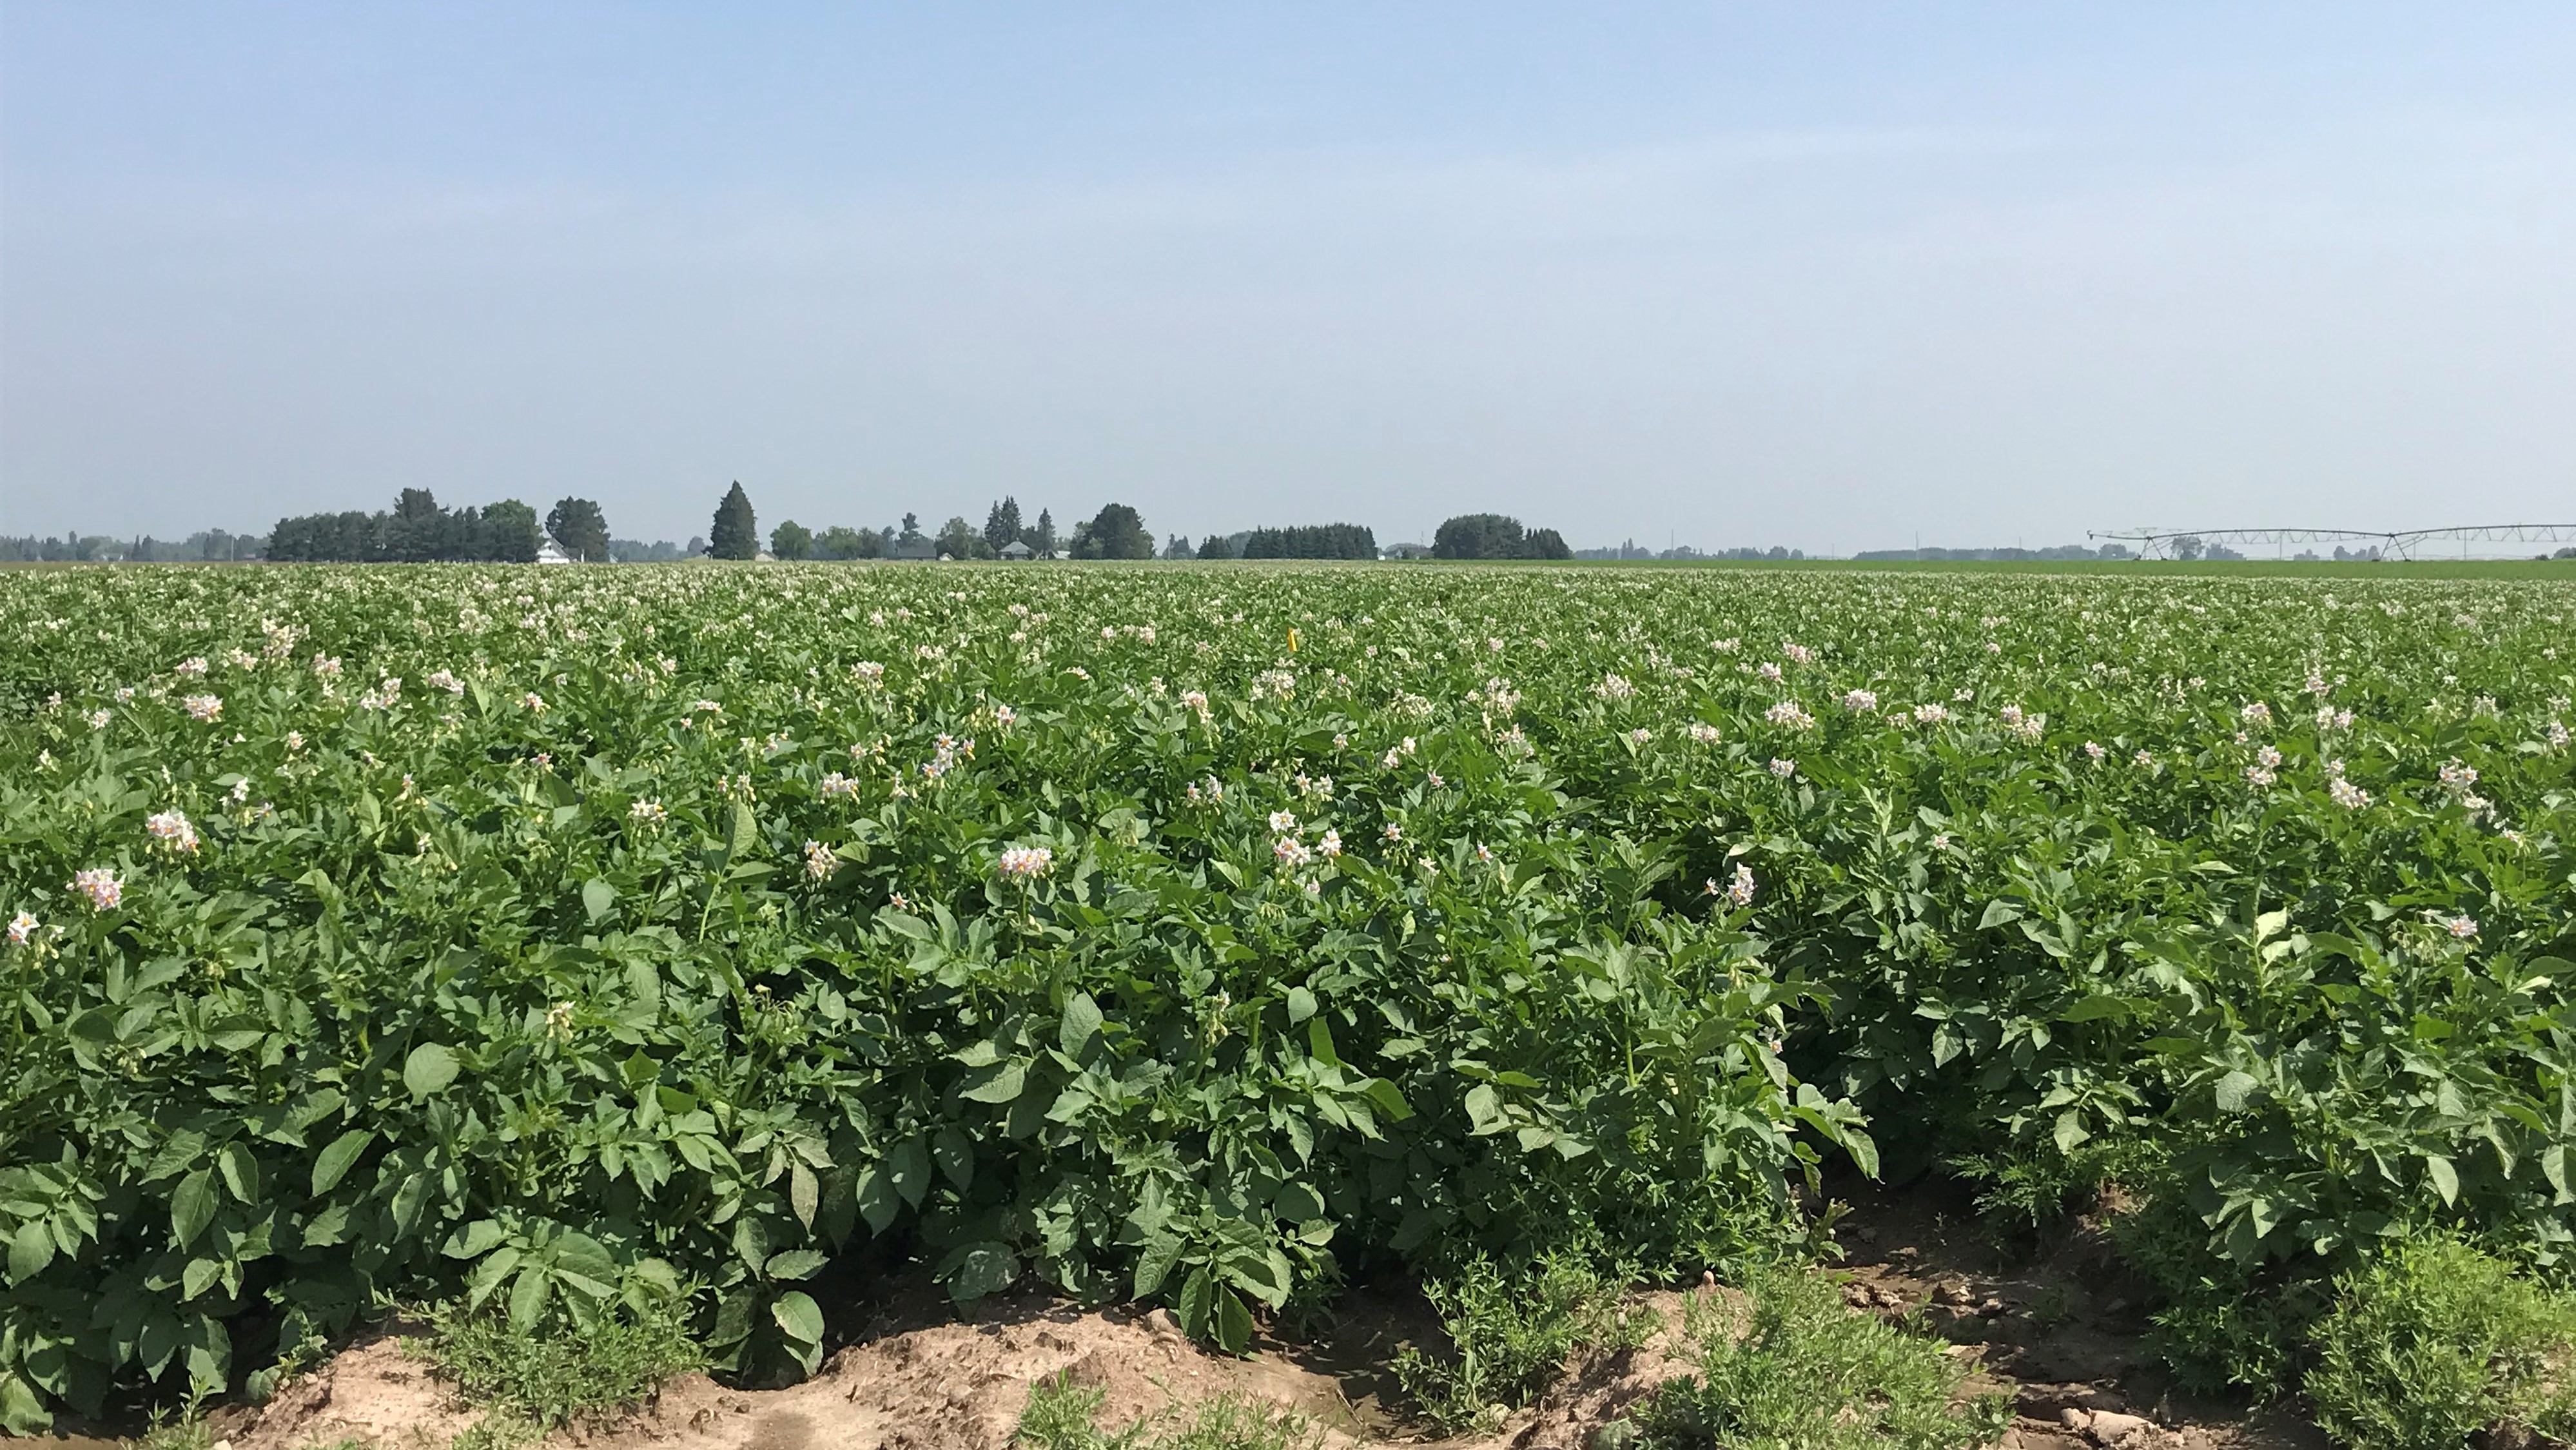 Potato Field in full bloom in the Antigo Flats AEA in Langlade County. Photo by Langlade County LCD.